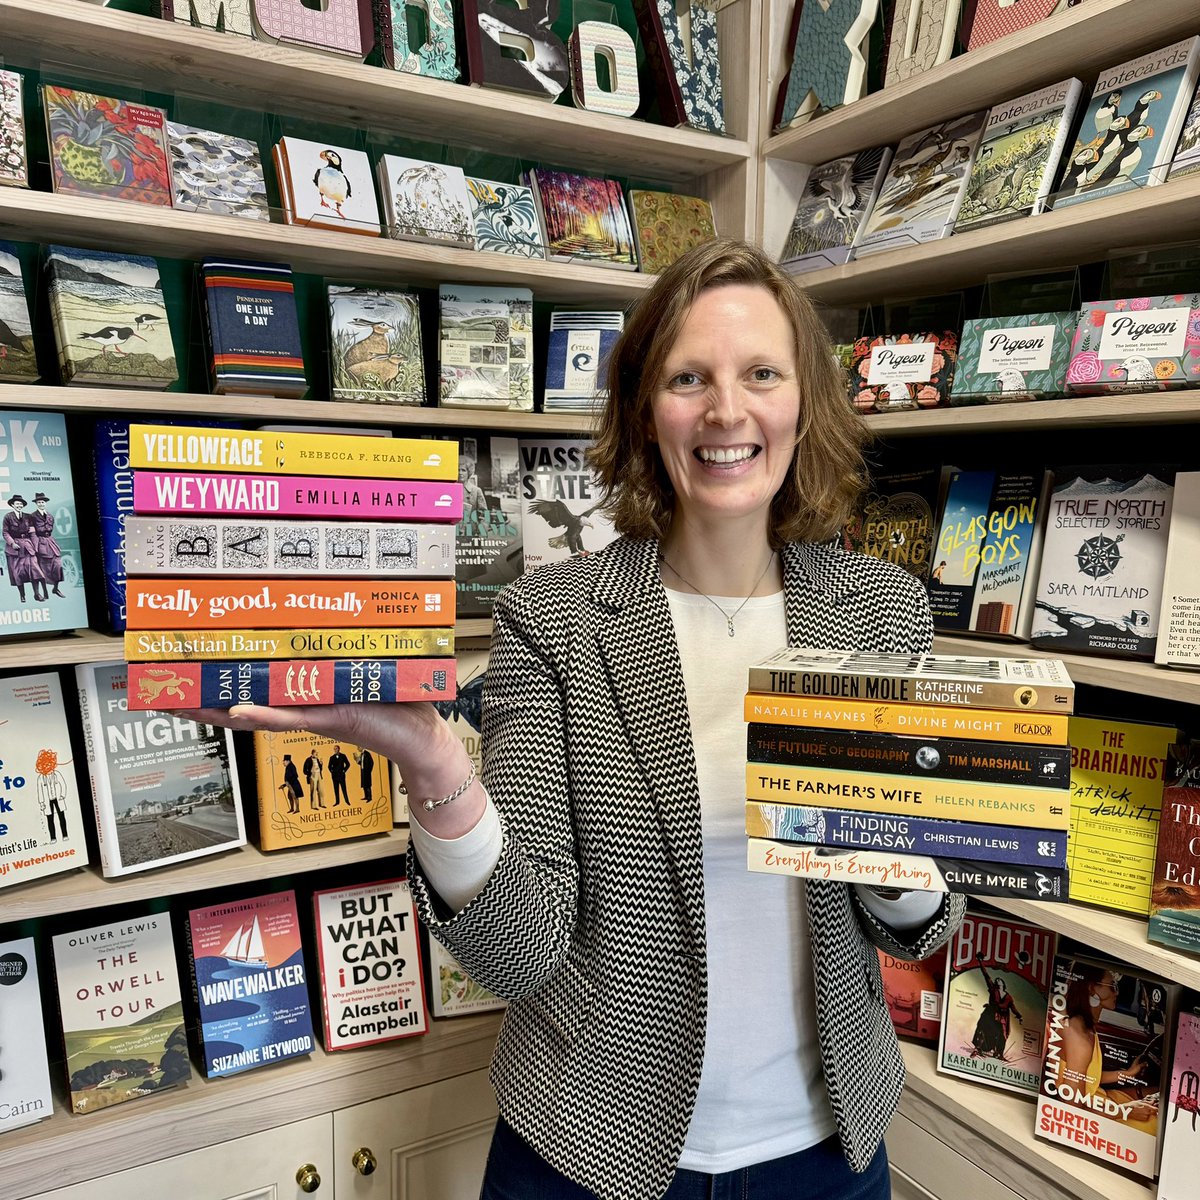 If you’re out and about today do pop into the bookshop to chat all things #IndieBookAwards with our Claire, who just happens to be on the judging panel this year. A fab selection of fiction and non-fiction on this year’s short list to sift through. @booksaremybag